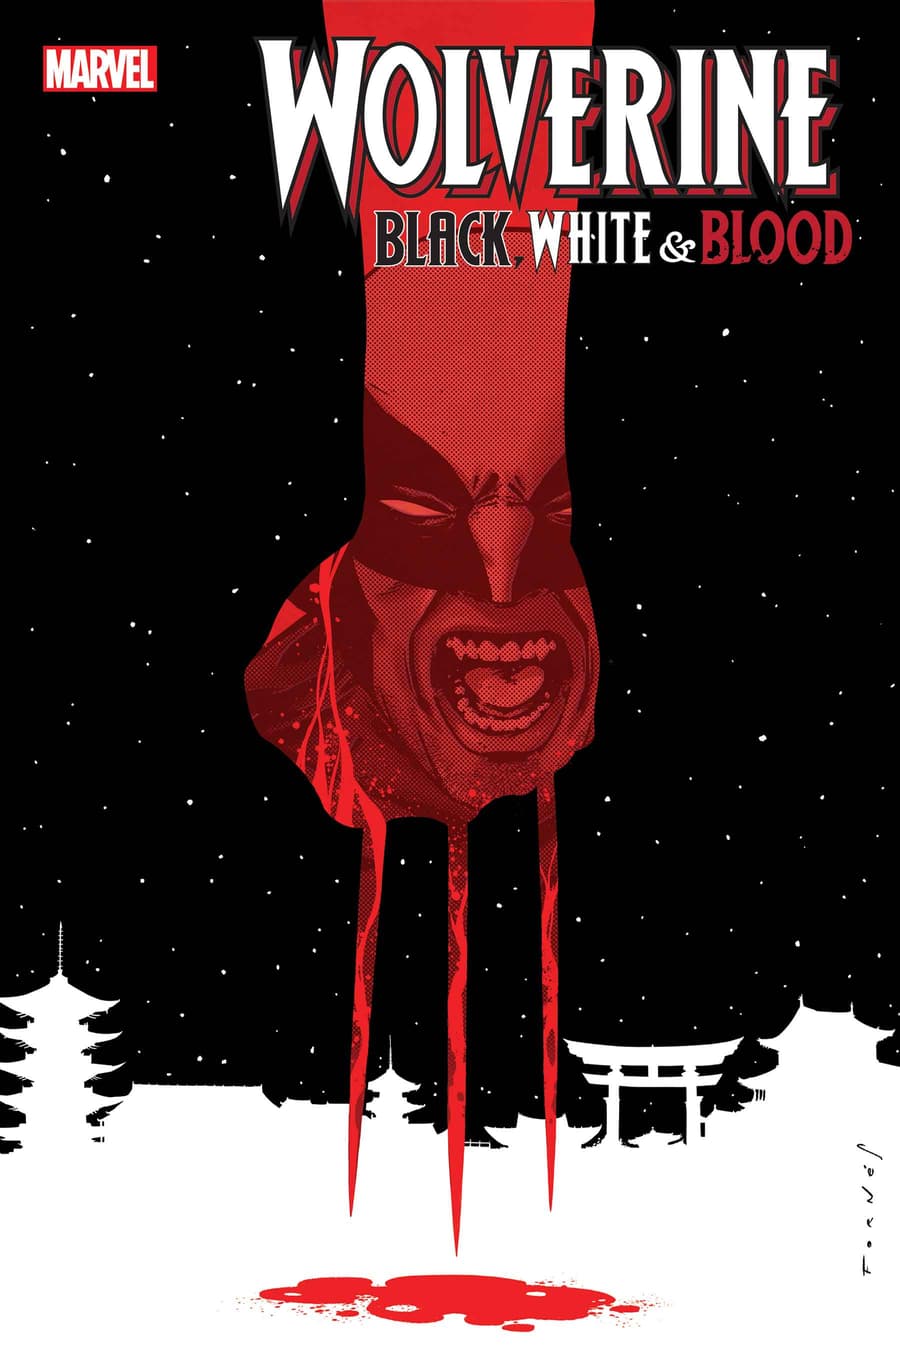 WOLVERINE: BLACK, WHITE, & BLOOD #3 cover by Jorge Fornés